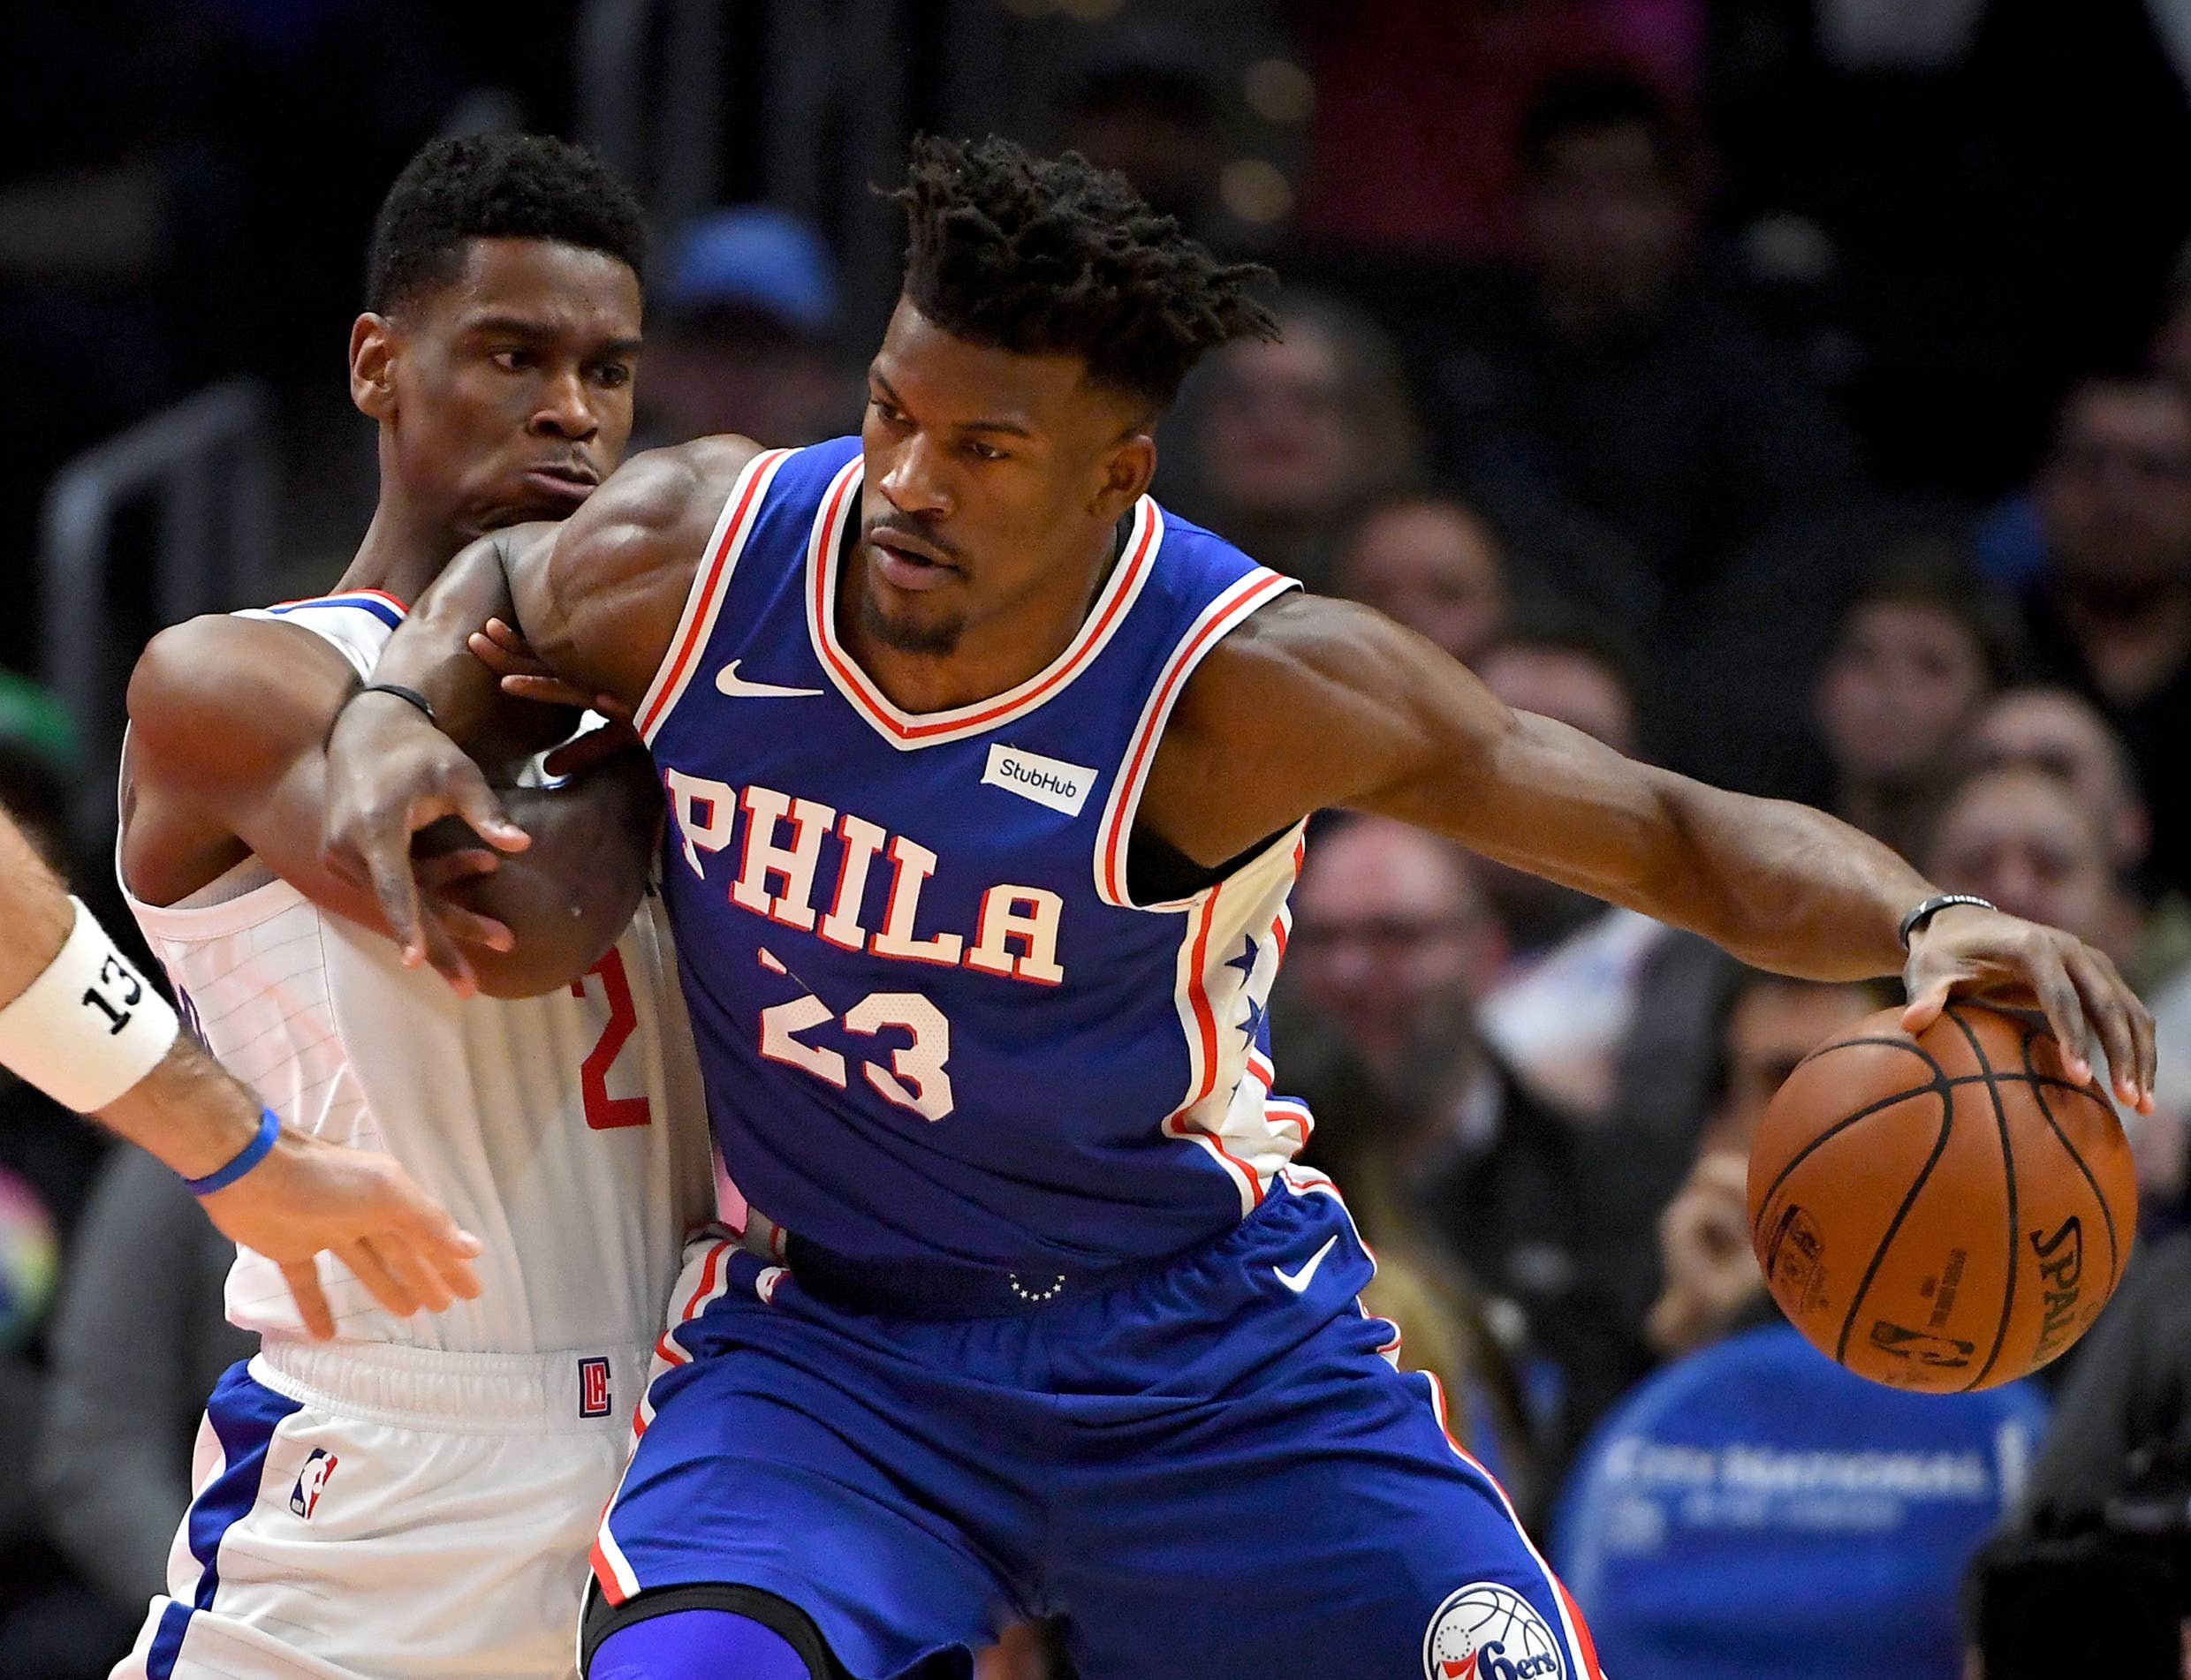 Jimmy Butler Shai Gilgeous Alexander Clippers Sixers 2018